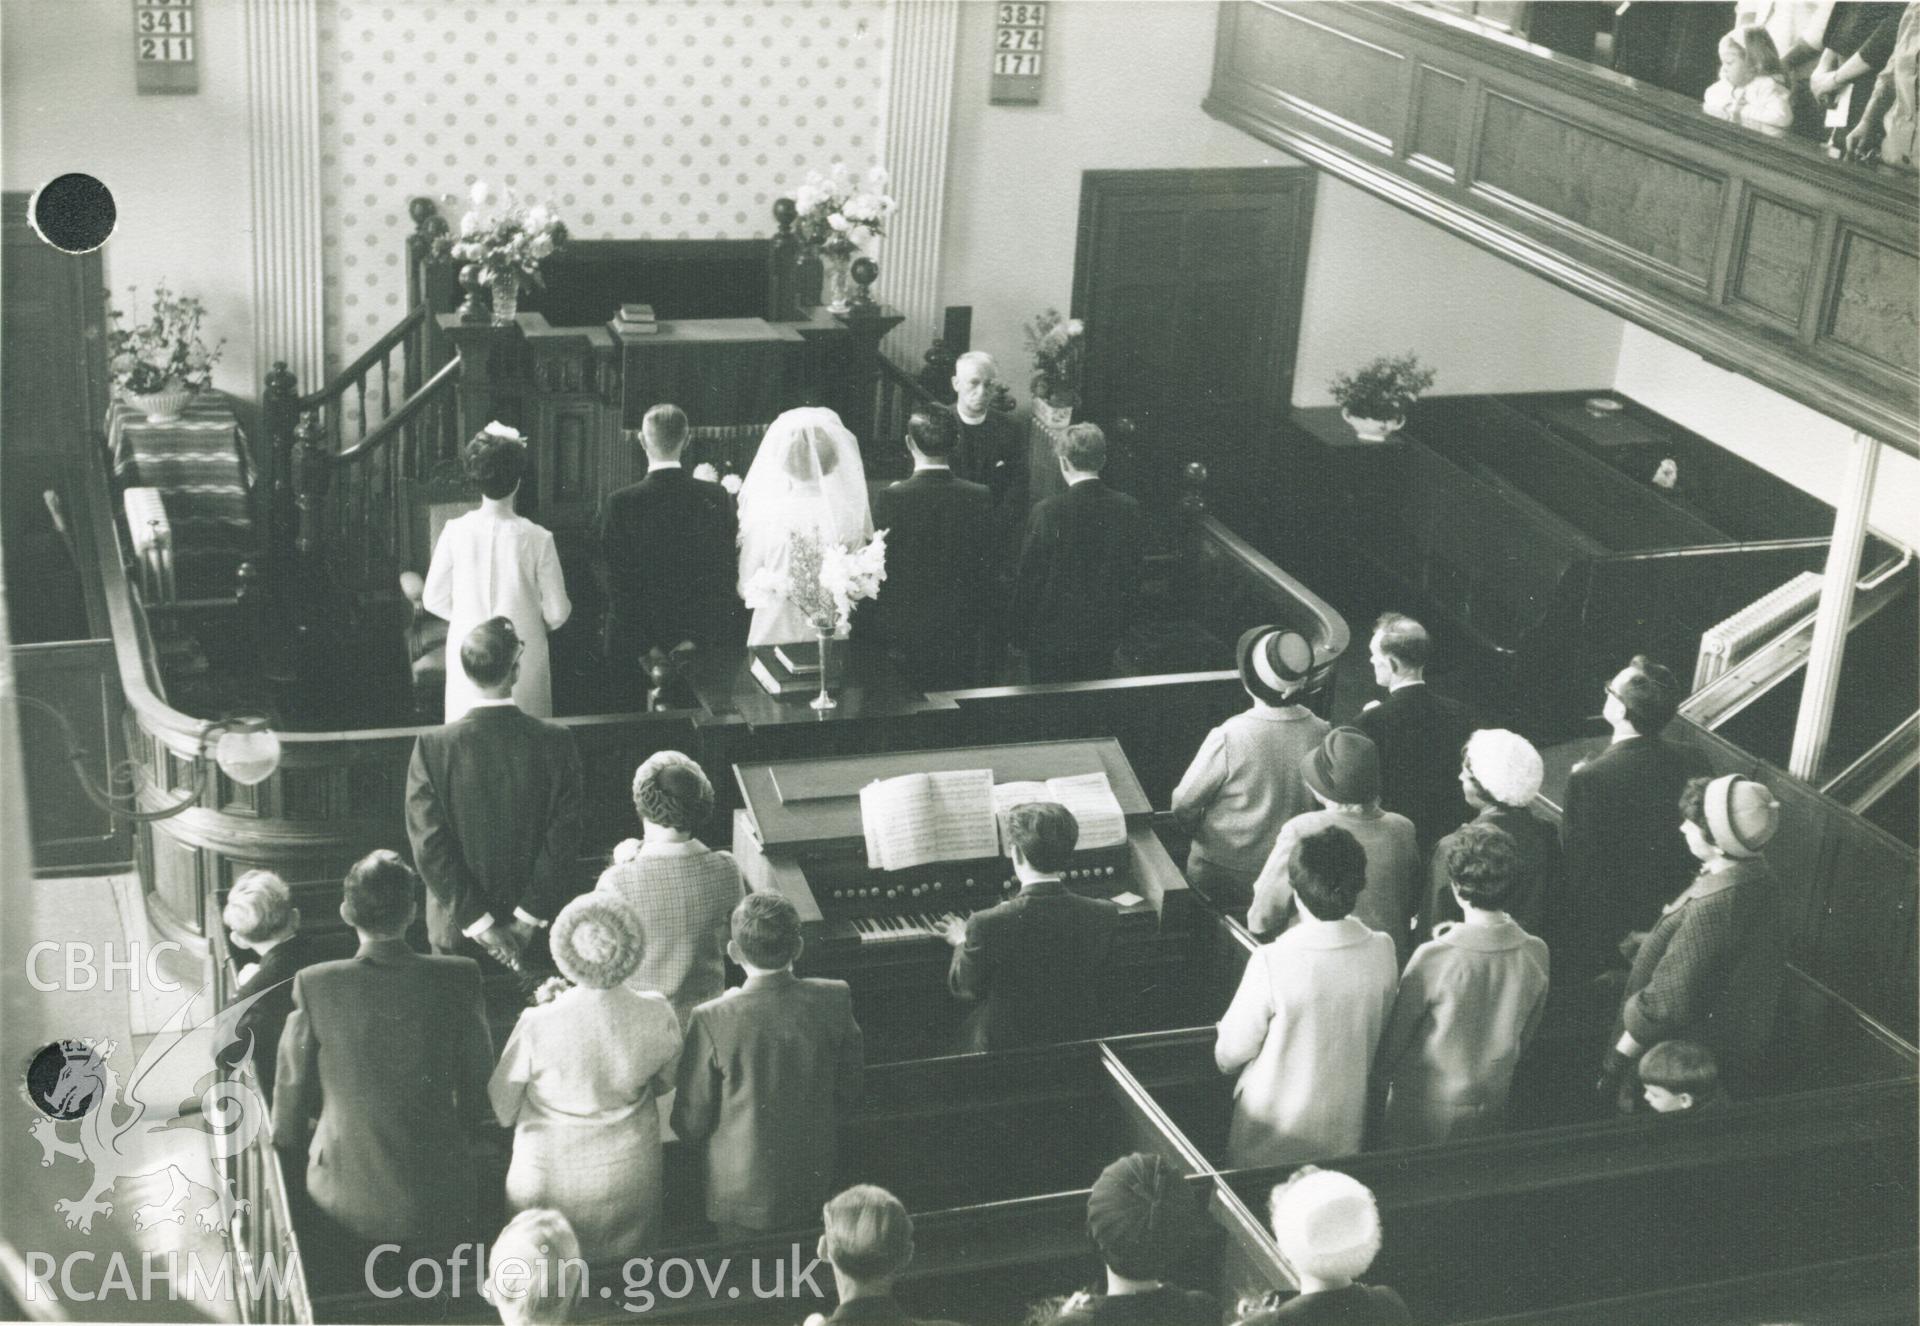 Black and white photograph of Mrs Gloria Pritchard (Chalk) wedding ceremony, Minister: Gwyn Jones, 28th September 1966. Donated as part of the Digital Dissent Project.